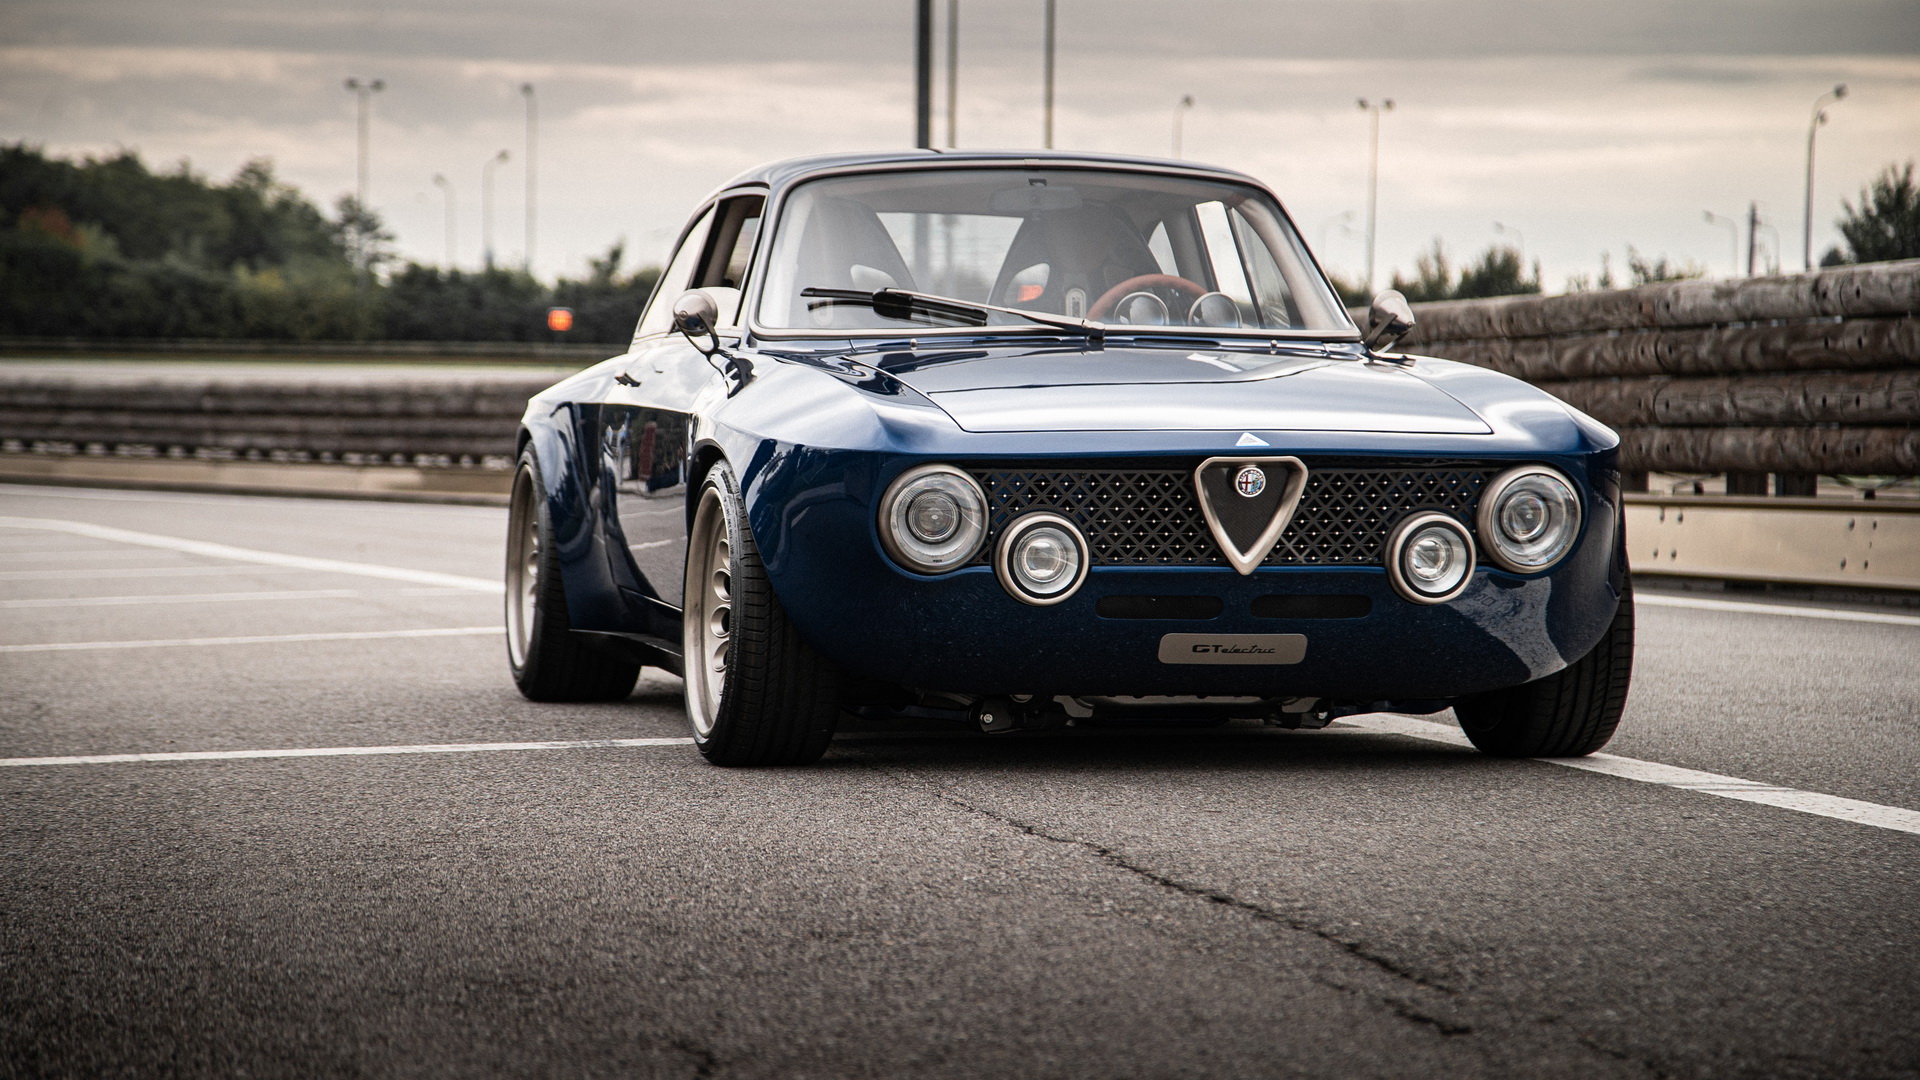 Totem's Electric Alfa Romeo GTA Is A Carbon Fiber Bodied Stunner